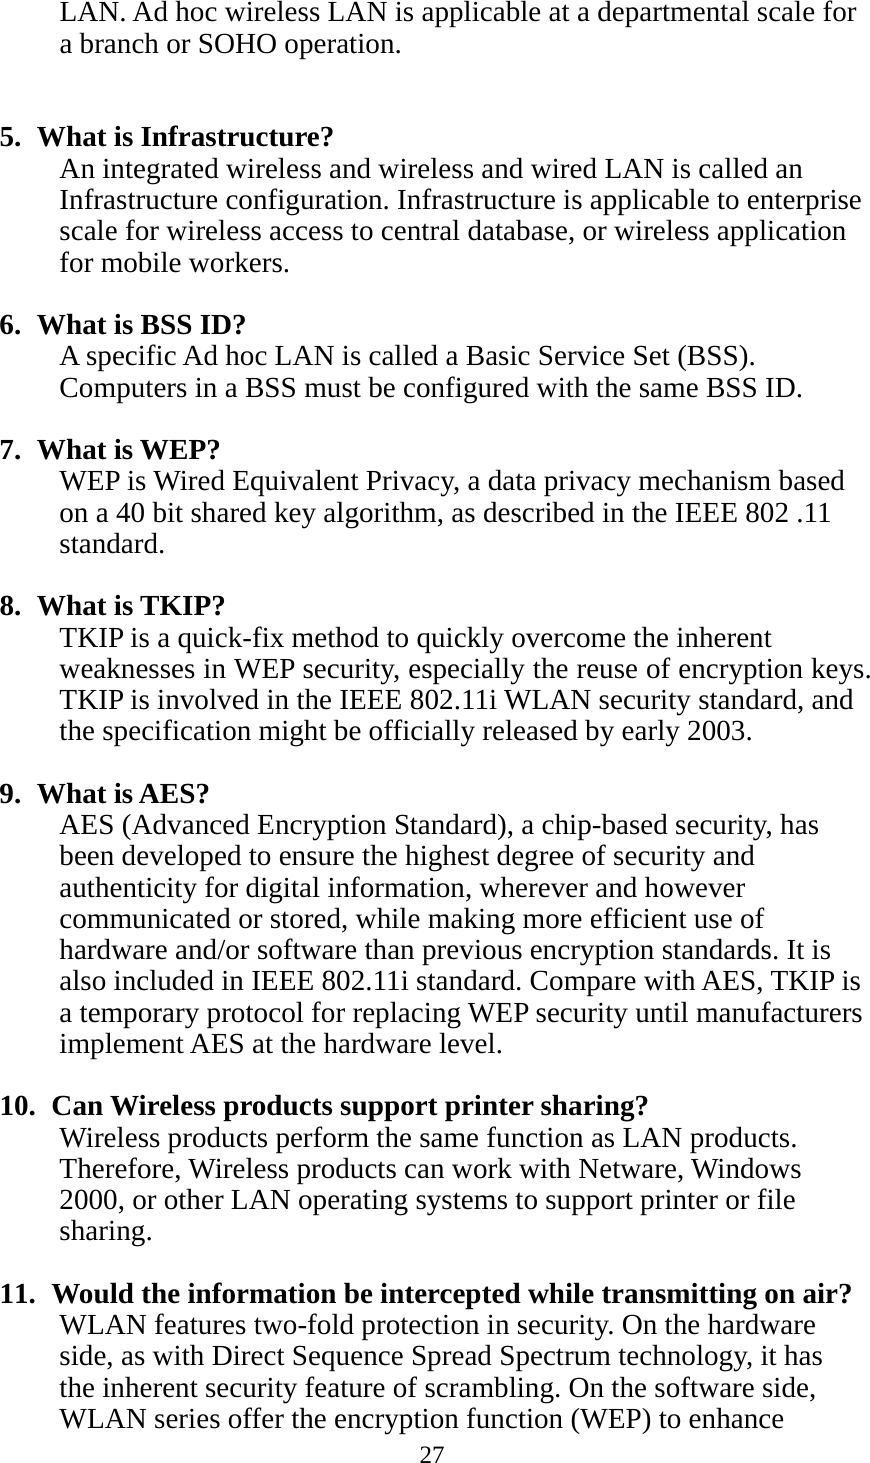 27  LAN. Ad hoc wireless LAN is applicable at a departmental scale for a branch or SOHO operation.   5. What is Infrastructure? An integrated wireless and wireless and wired LAN is called an Infrastructure configuration. Infrastructure is applicable to enterprise scale for wireless access to central database, or wireless application for mobile workers.  6. What is BSS ID? A specific Ad hoc LAN is called a Basic Service Set (BSS). Computers in a BSS must be configured with the same BSS ID.  7. What is WEP? WEP is Wired Equivalent Privacy, a data privacy mechanism based on a 40 bit shared key algorithm, as described in the IEEE 802 .11 standard.  8. What is TKIP? TKIP is a quick-fix method to quickly overcome the inherent weaknesses in WEP security, especially the reuse of encryption keys. TKIP is involved in the IEEE 802.11i WLAN security standard, and the specification might be officially released by early 2003.  9. What is AES? AES (Advanced Encryption Standard), a chip-based security, has been developed to ensure the highest degree of security and authenticity for digital information, wherever and however communicated or stored, while making more efficient use of hardware and/or software than previous encryption standards. It is also included in IEEE 802.11i standard. Compare with AES, TKIP is a temporary protocol for replacing WEP security until manufacturers implement AES at the hardware level.  10.   Can Wireless products support printer sharing?   Wireless products perform the same function as LAN products. Therefore, Wireless products can work with Netware, Windows 2000, or other LAN operating systems to support printer or file sharing.  11.   Would the information be intercepted while transmitting on air? WLAN features two-fold protection in security. On the hardware side, as with Direct Sequence Spread Spectrum technology, it has the inherent security feature of scrambling. On the software side, WLAN series offer the encryption function (WEP) to enhance 